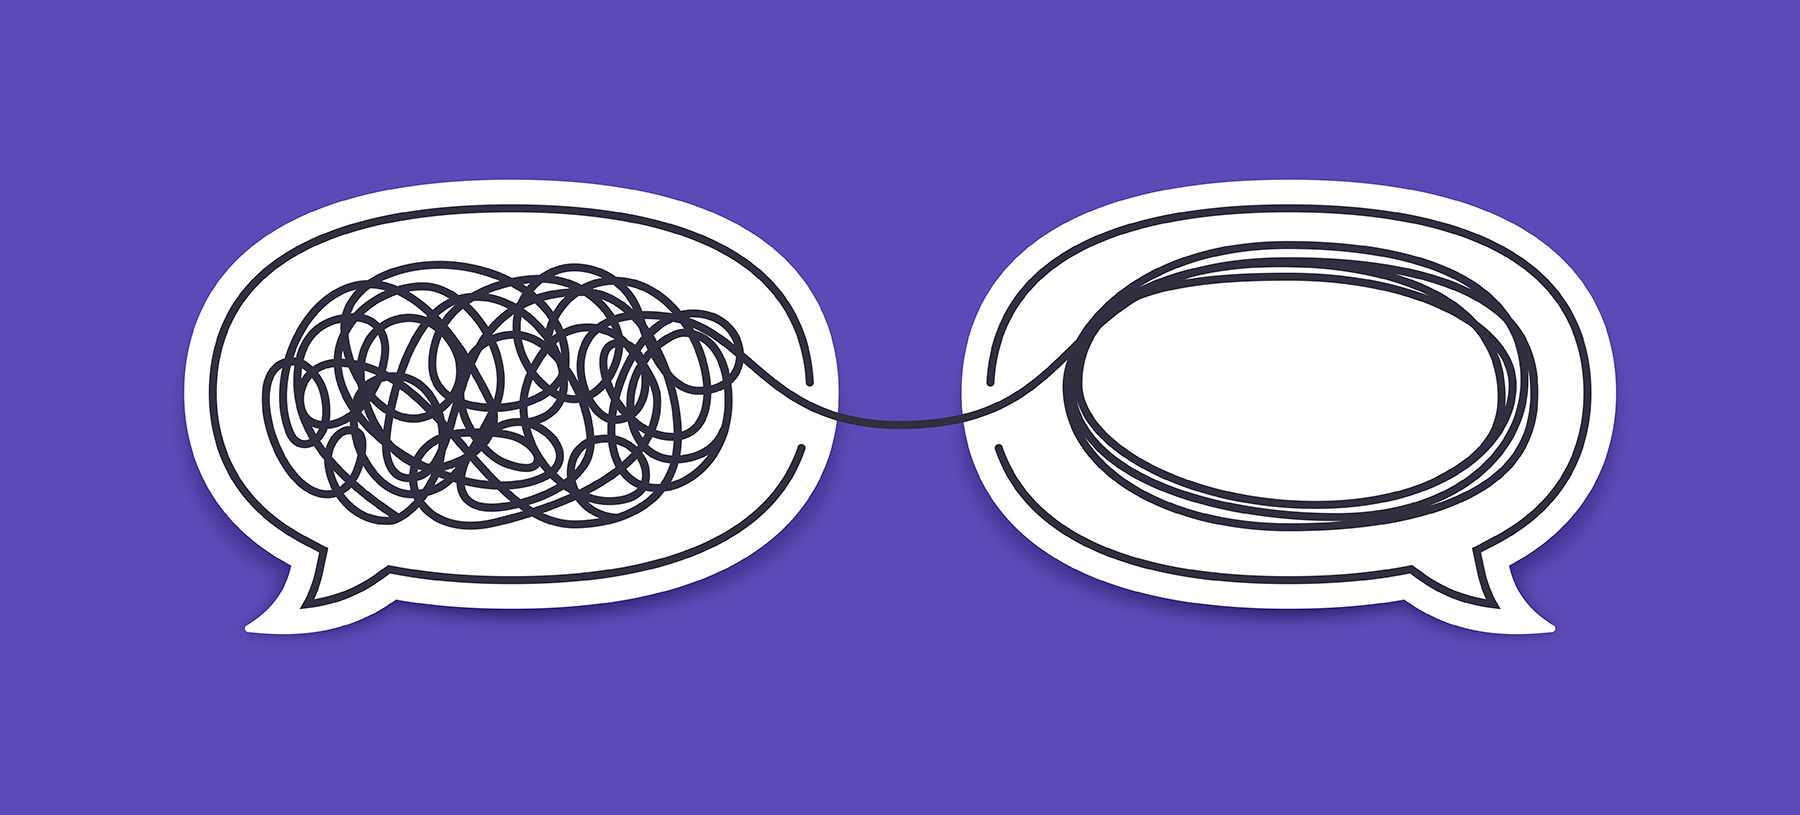 Graphic with two thought bubbles - left one has messy string of thoughts, right one is organized and streatmlined.